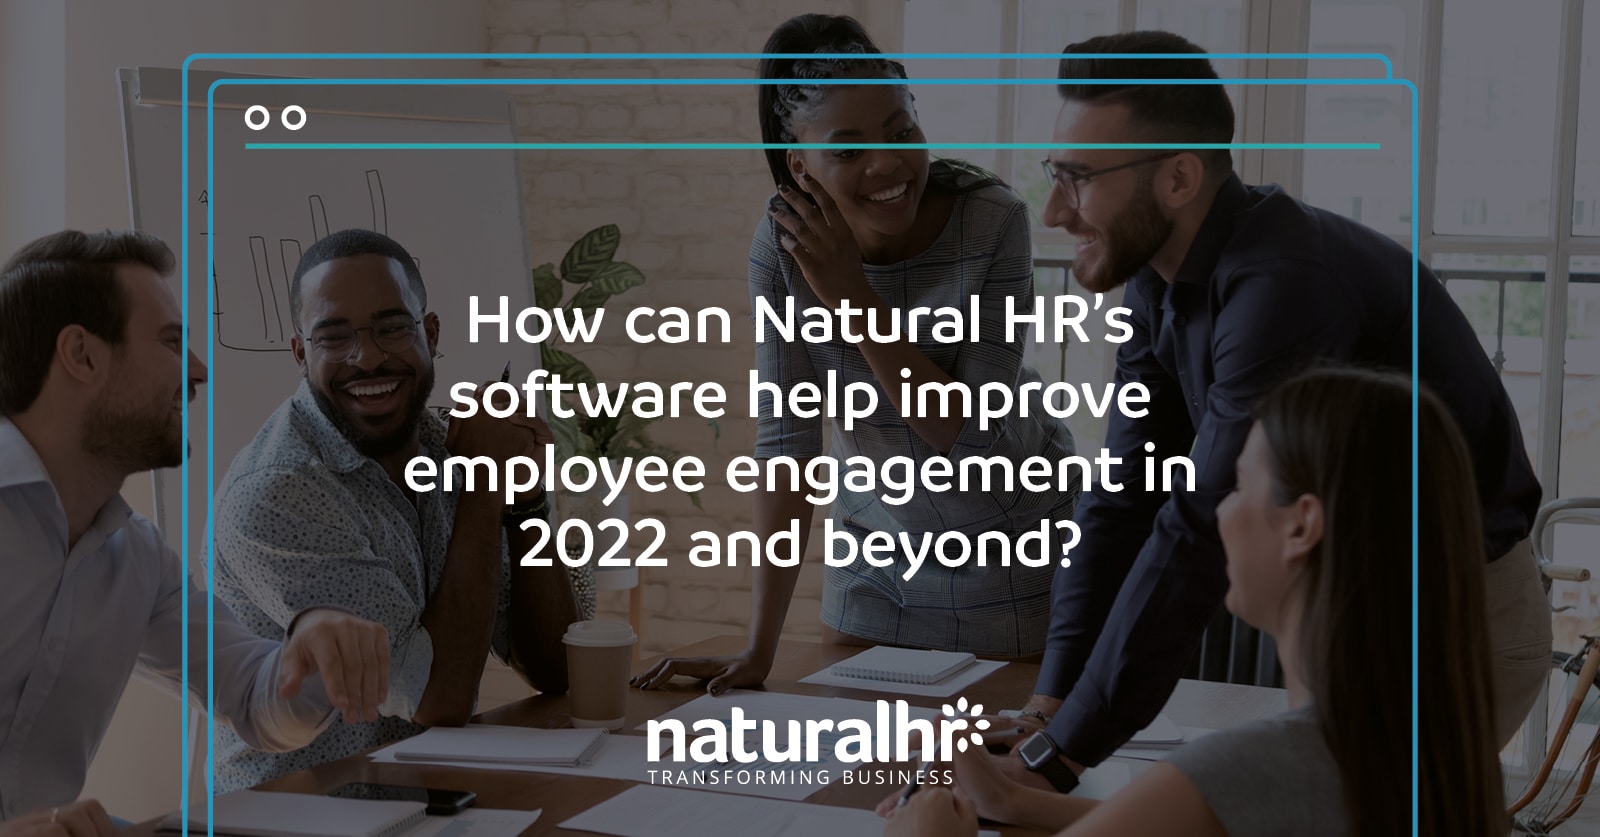 How can Natural HR's software help improve employee engagement in 2022 and beyond?